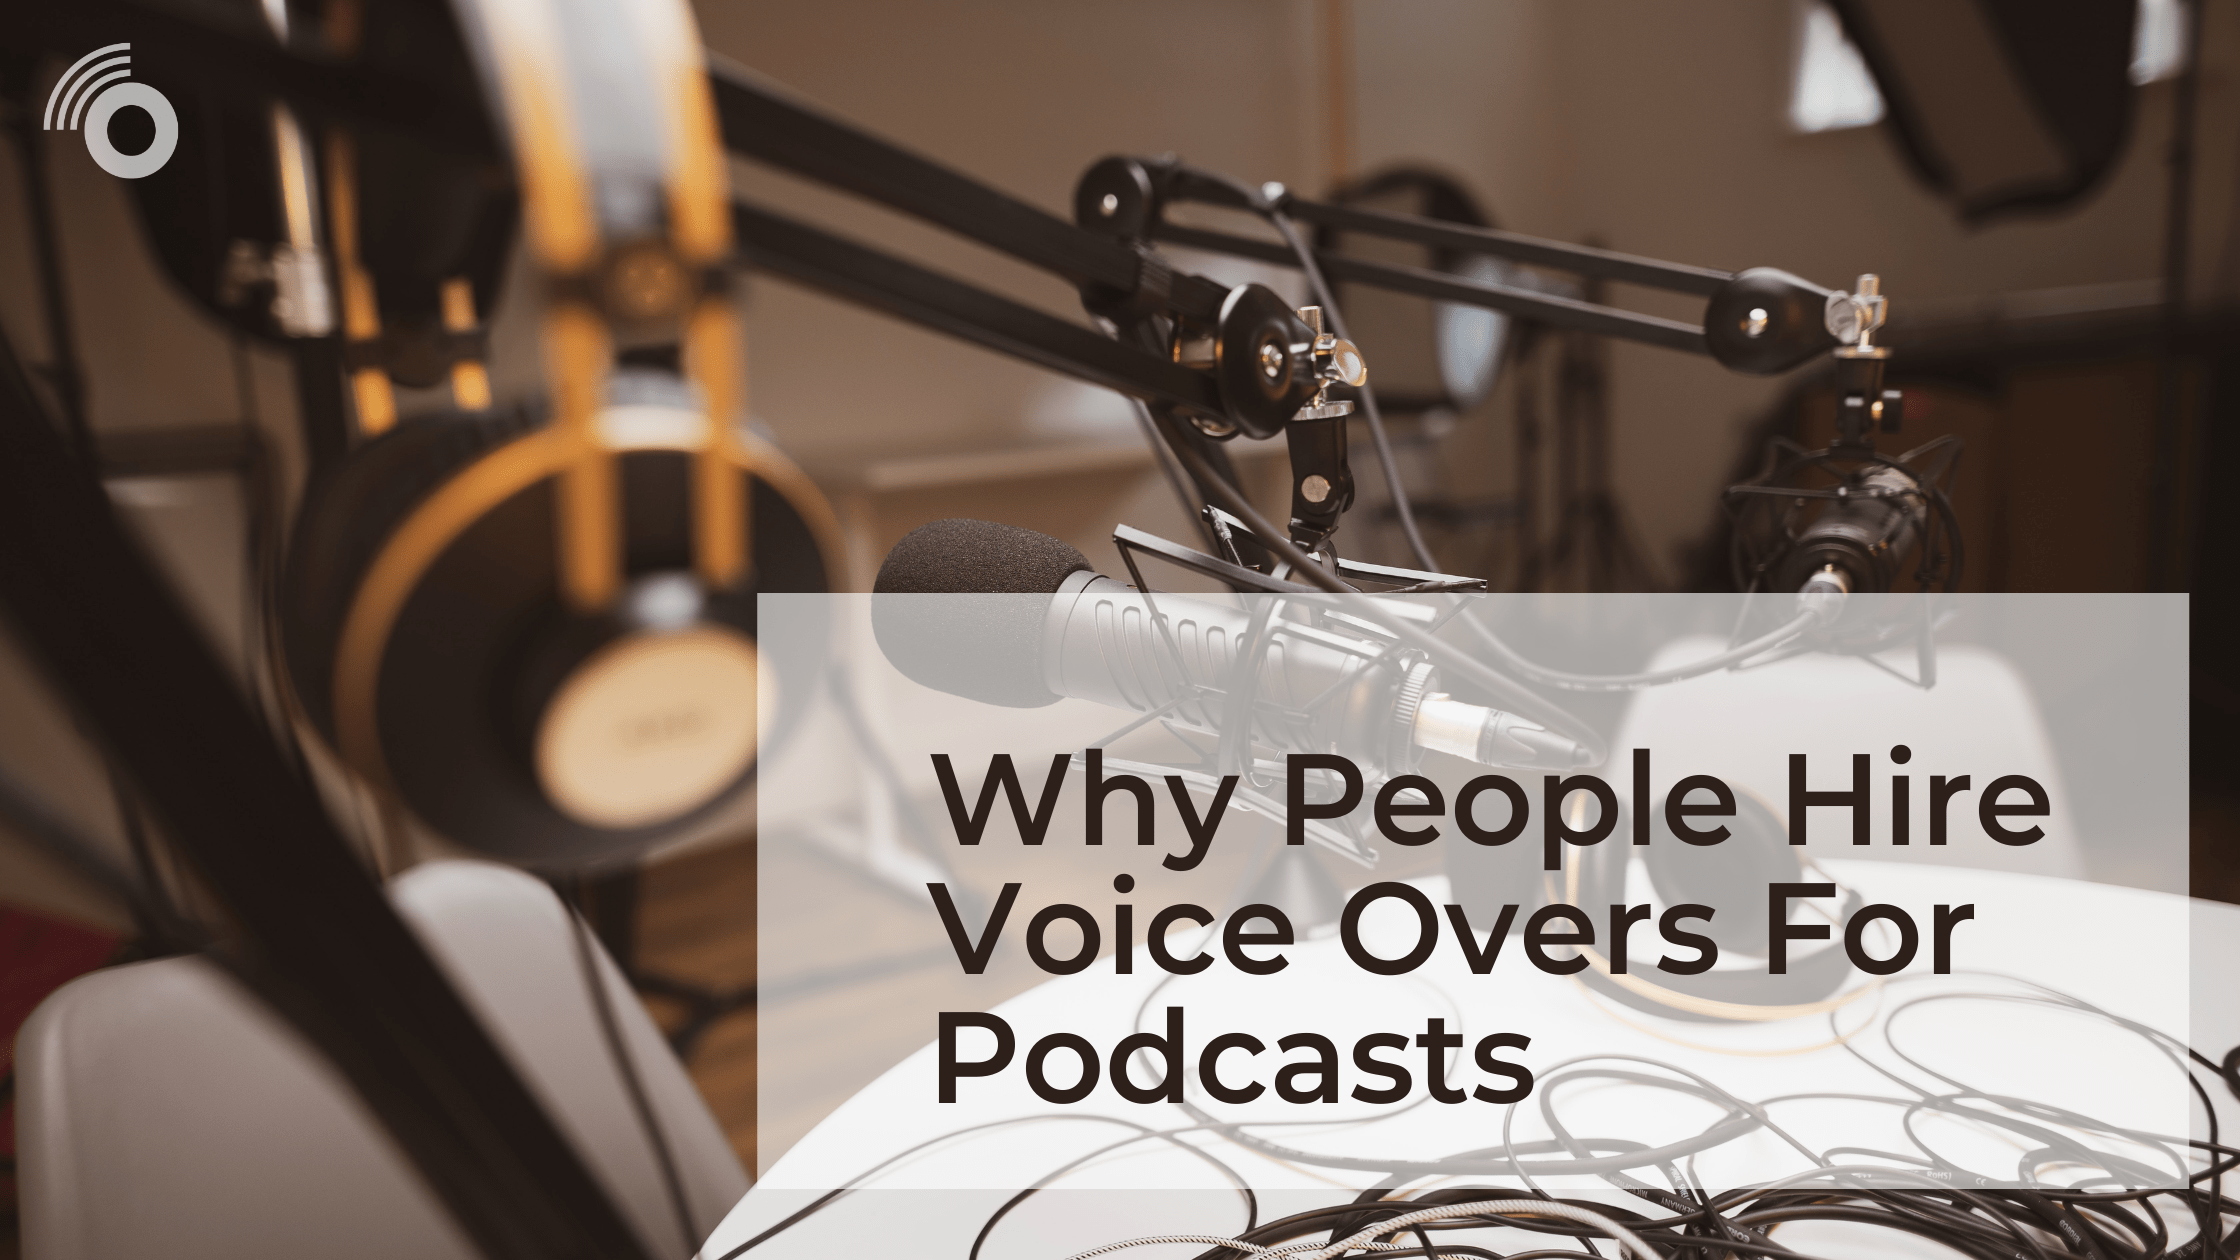 Why People Hire Voice Overs For Podcasts